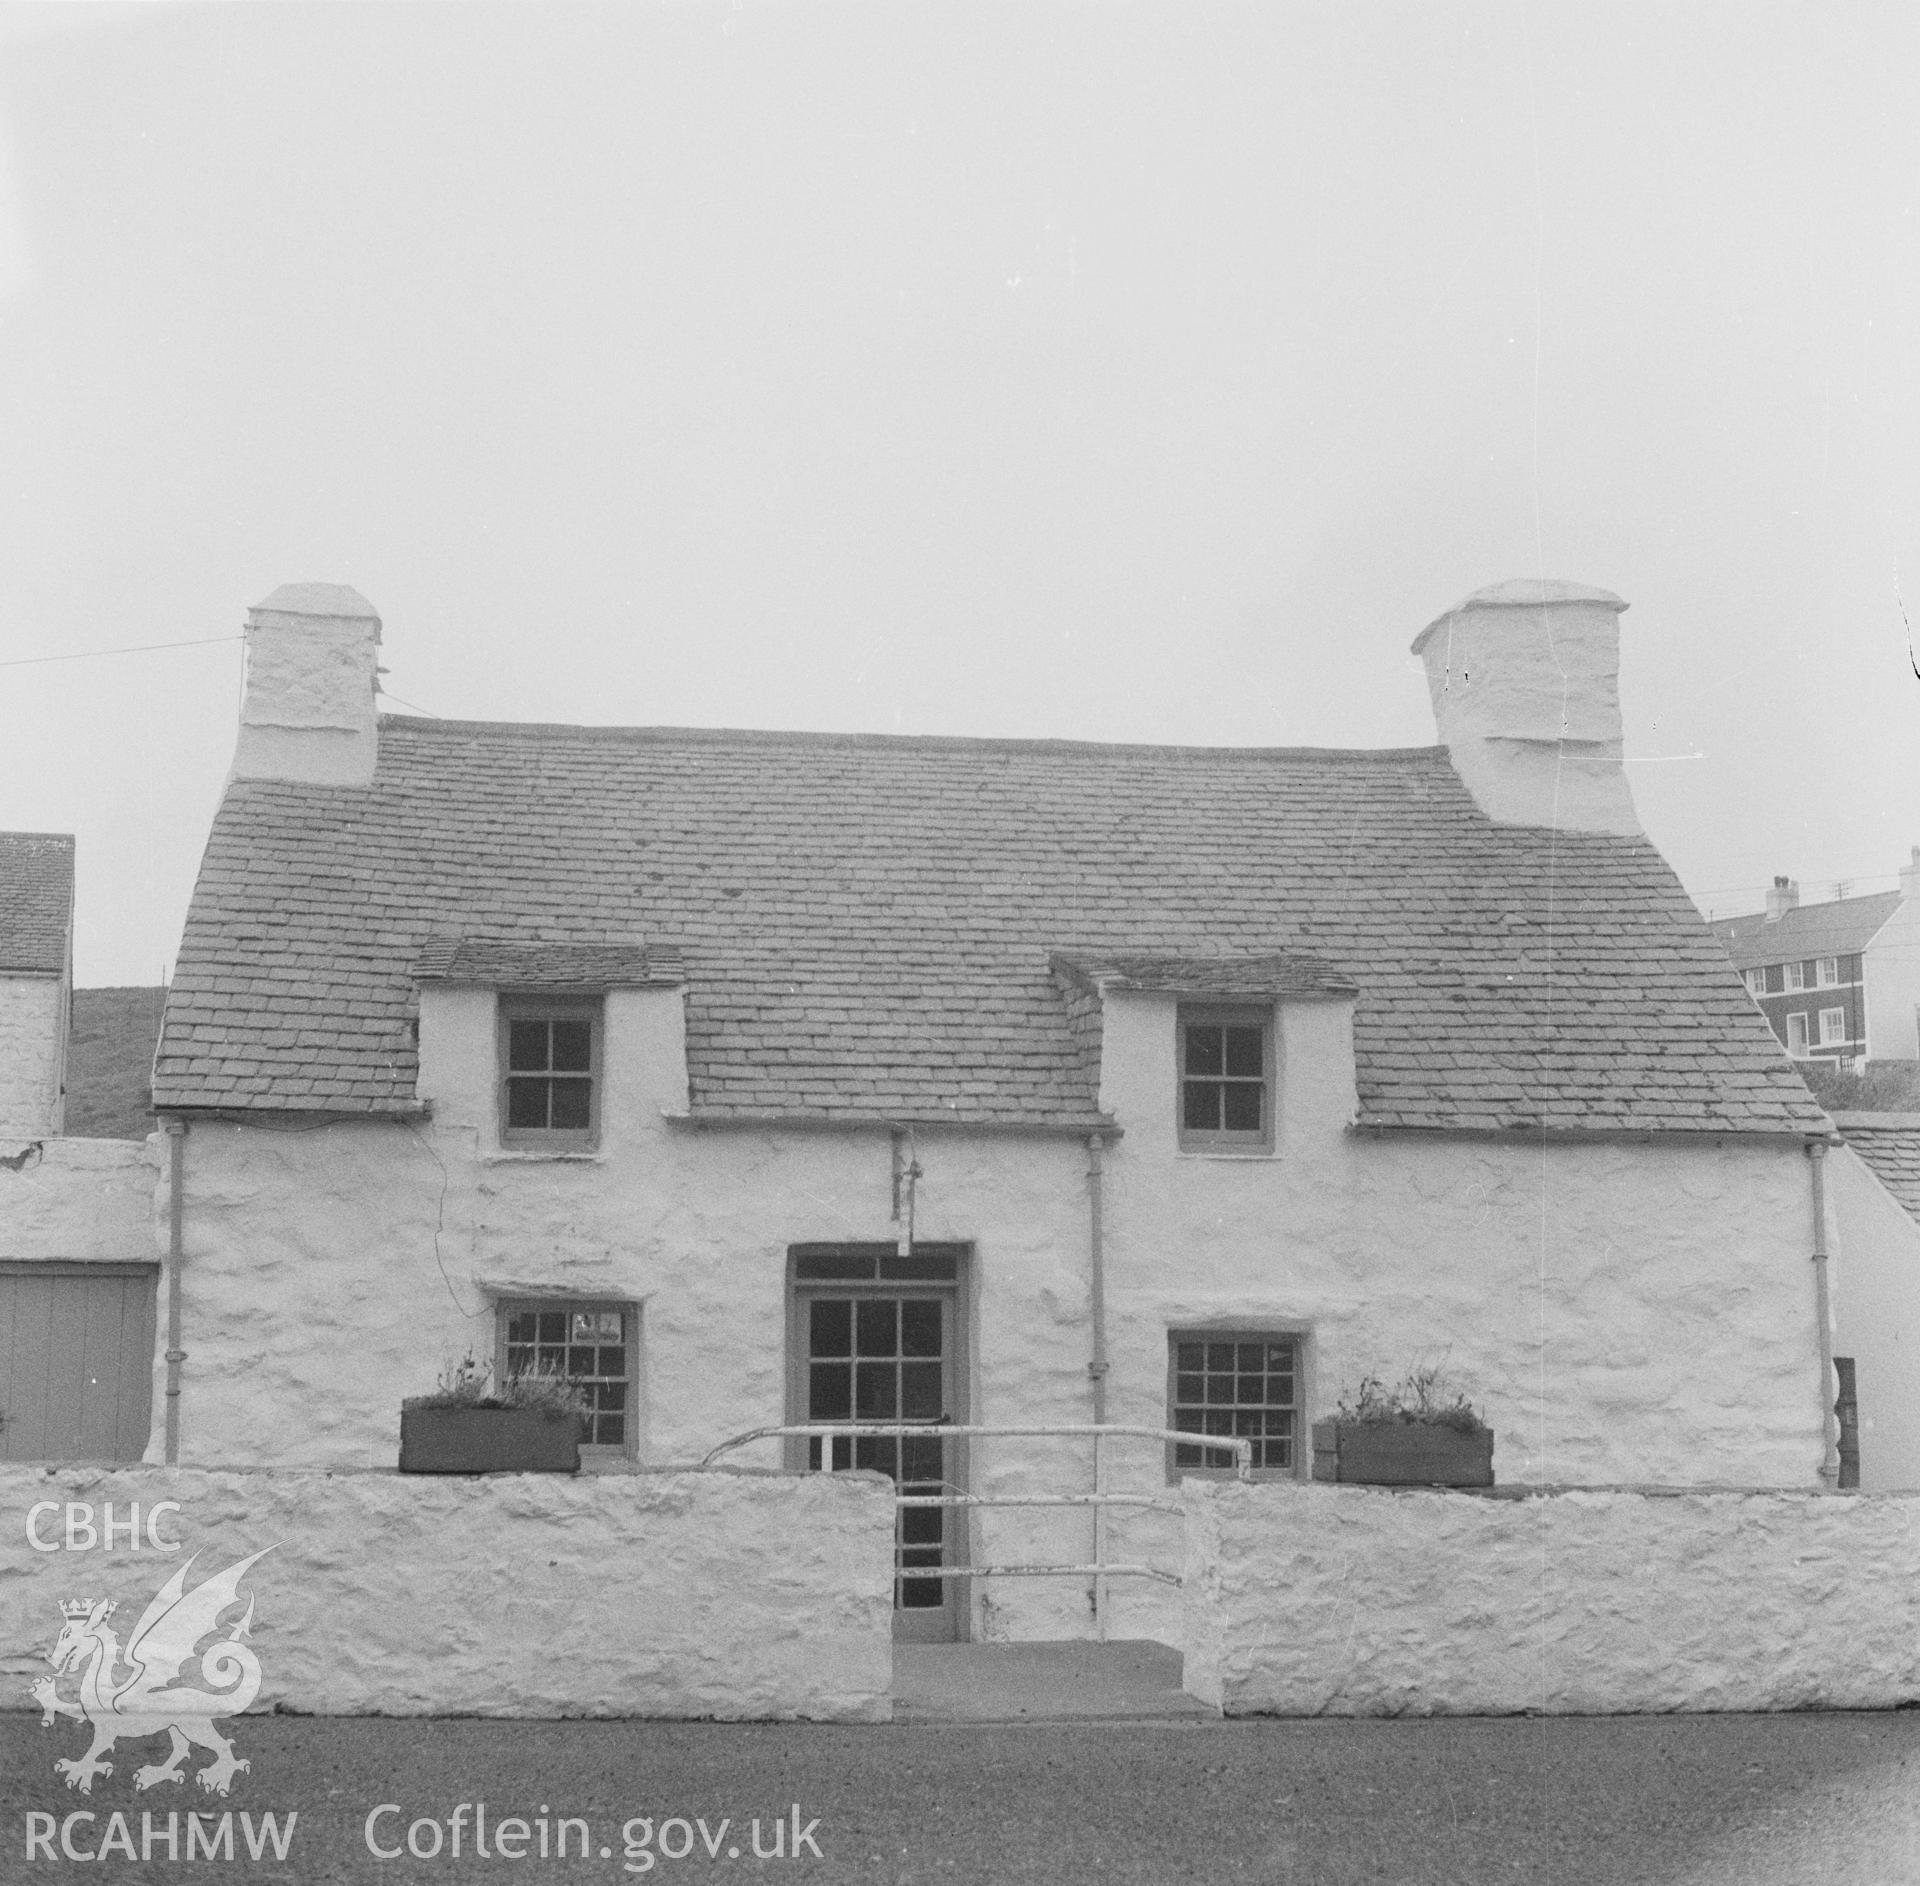 Digital copy of a black and white nitrate negative showing an exterior view of unidentified cottages, captioned 'Caernarfon Cottages'.